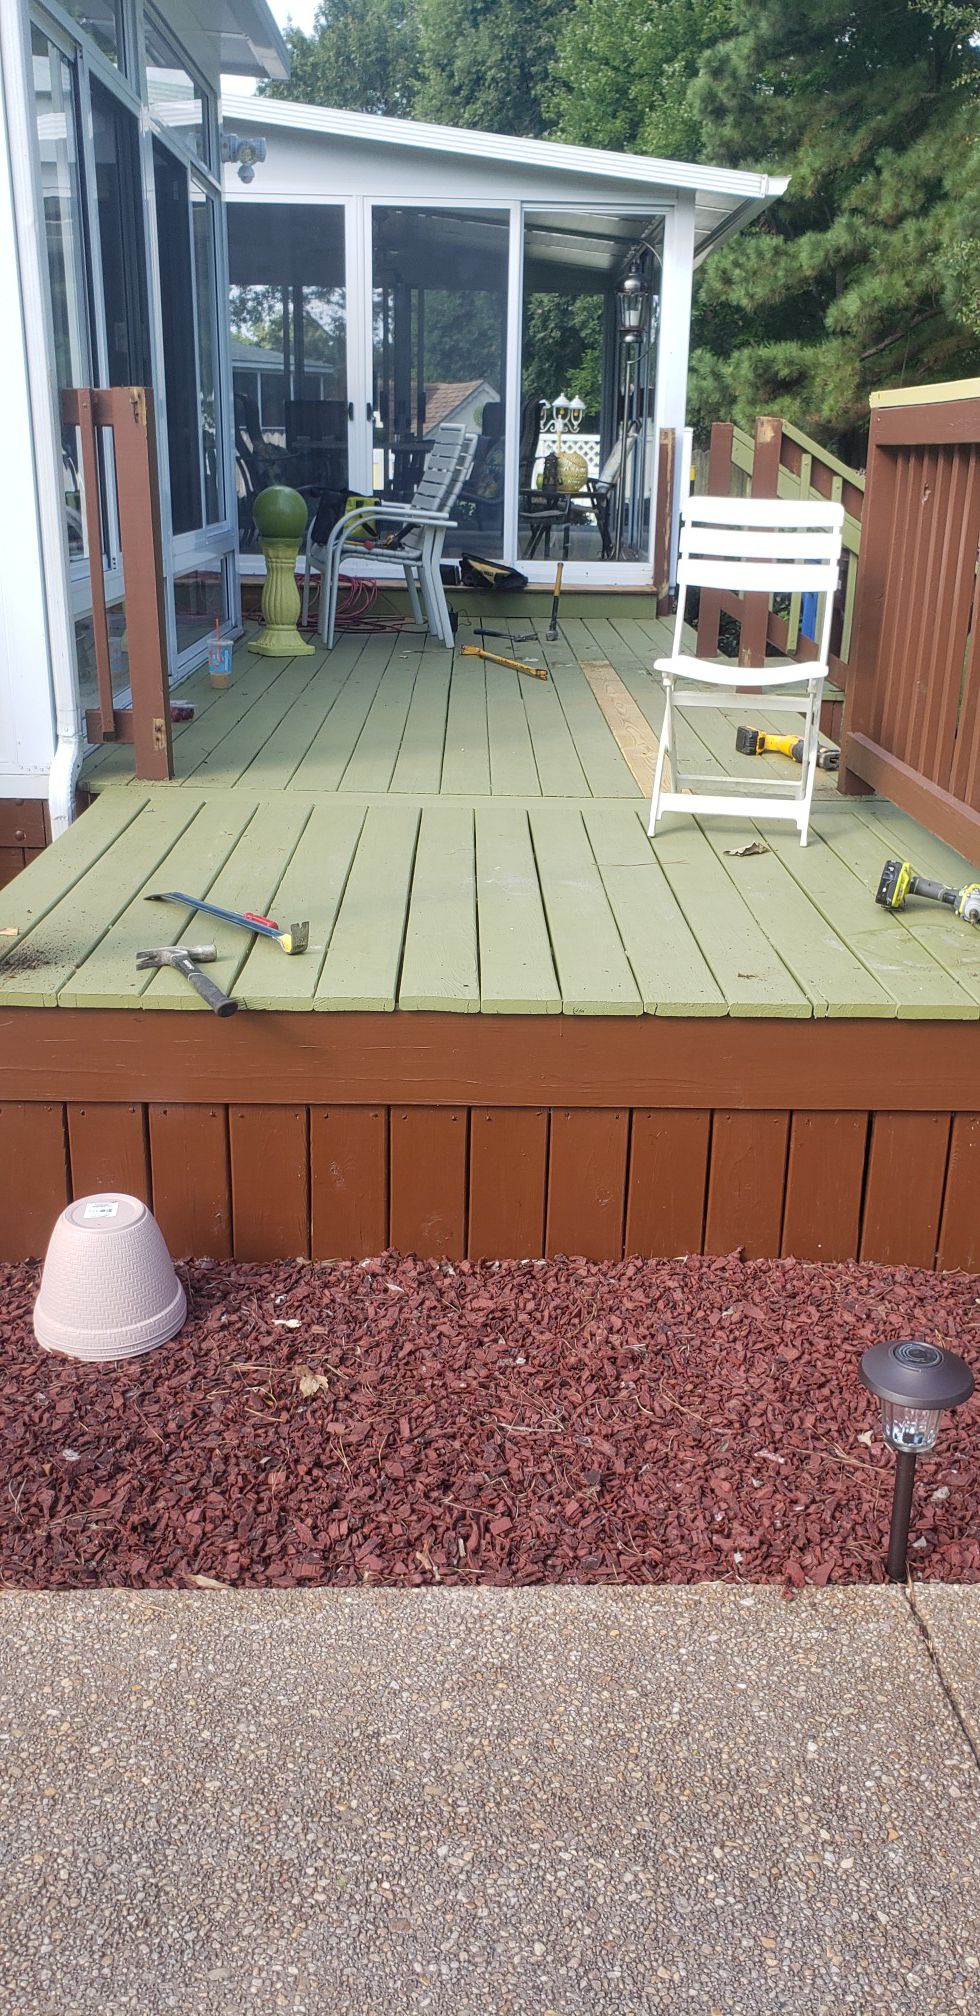 2×6 salt treated deck boards and hand rails